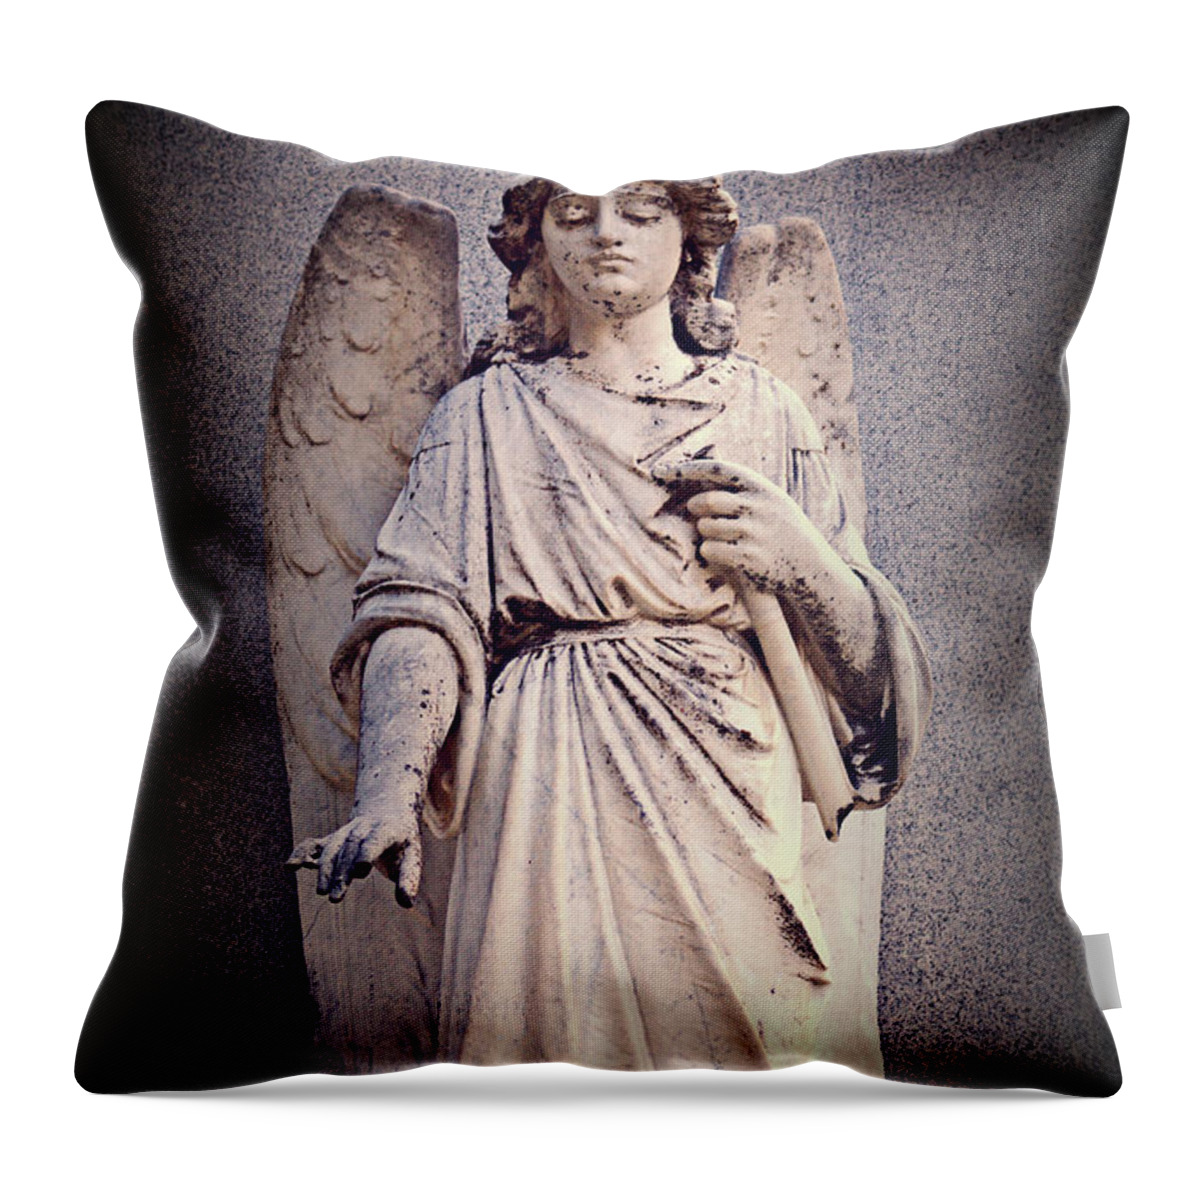 Angel Art Throw Pillow featuring the photograph Angel Art - Celestial Peace by Ella Kaye Dickey